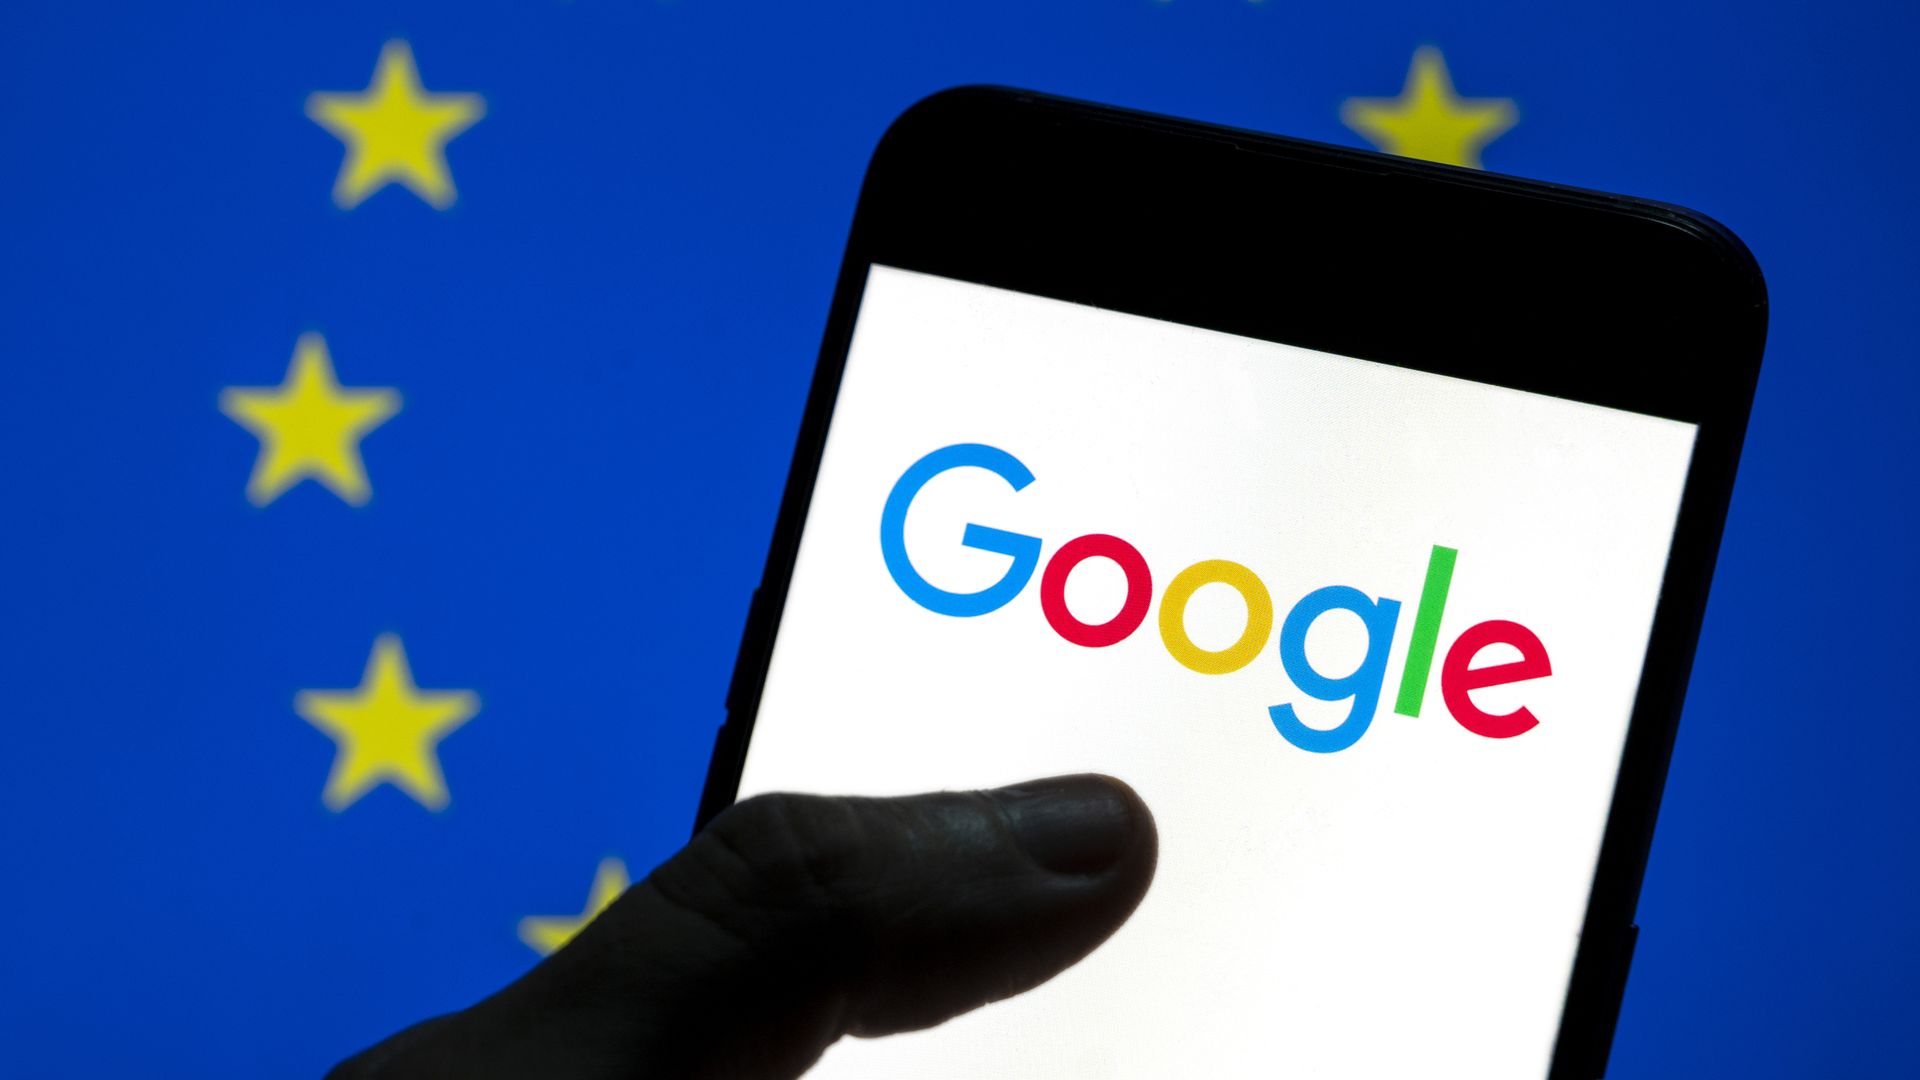 In this photo illustration the American multinational technology company and search engine Google logo is seen on an Android mobile device screen with the EU flag in the background.